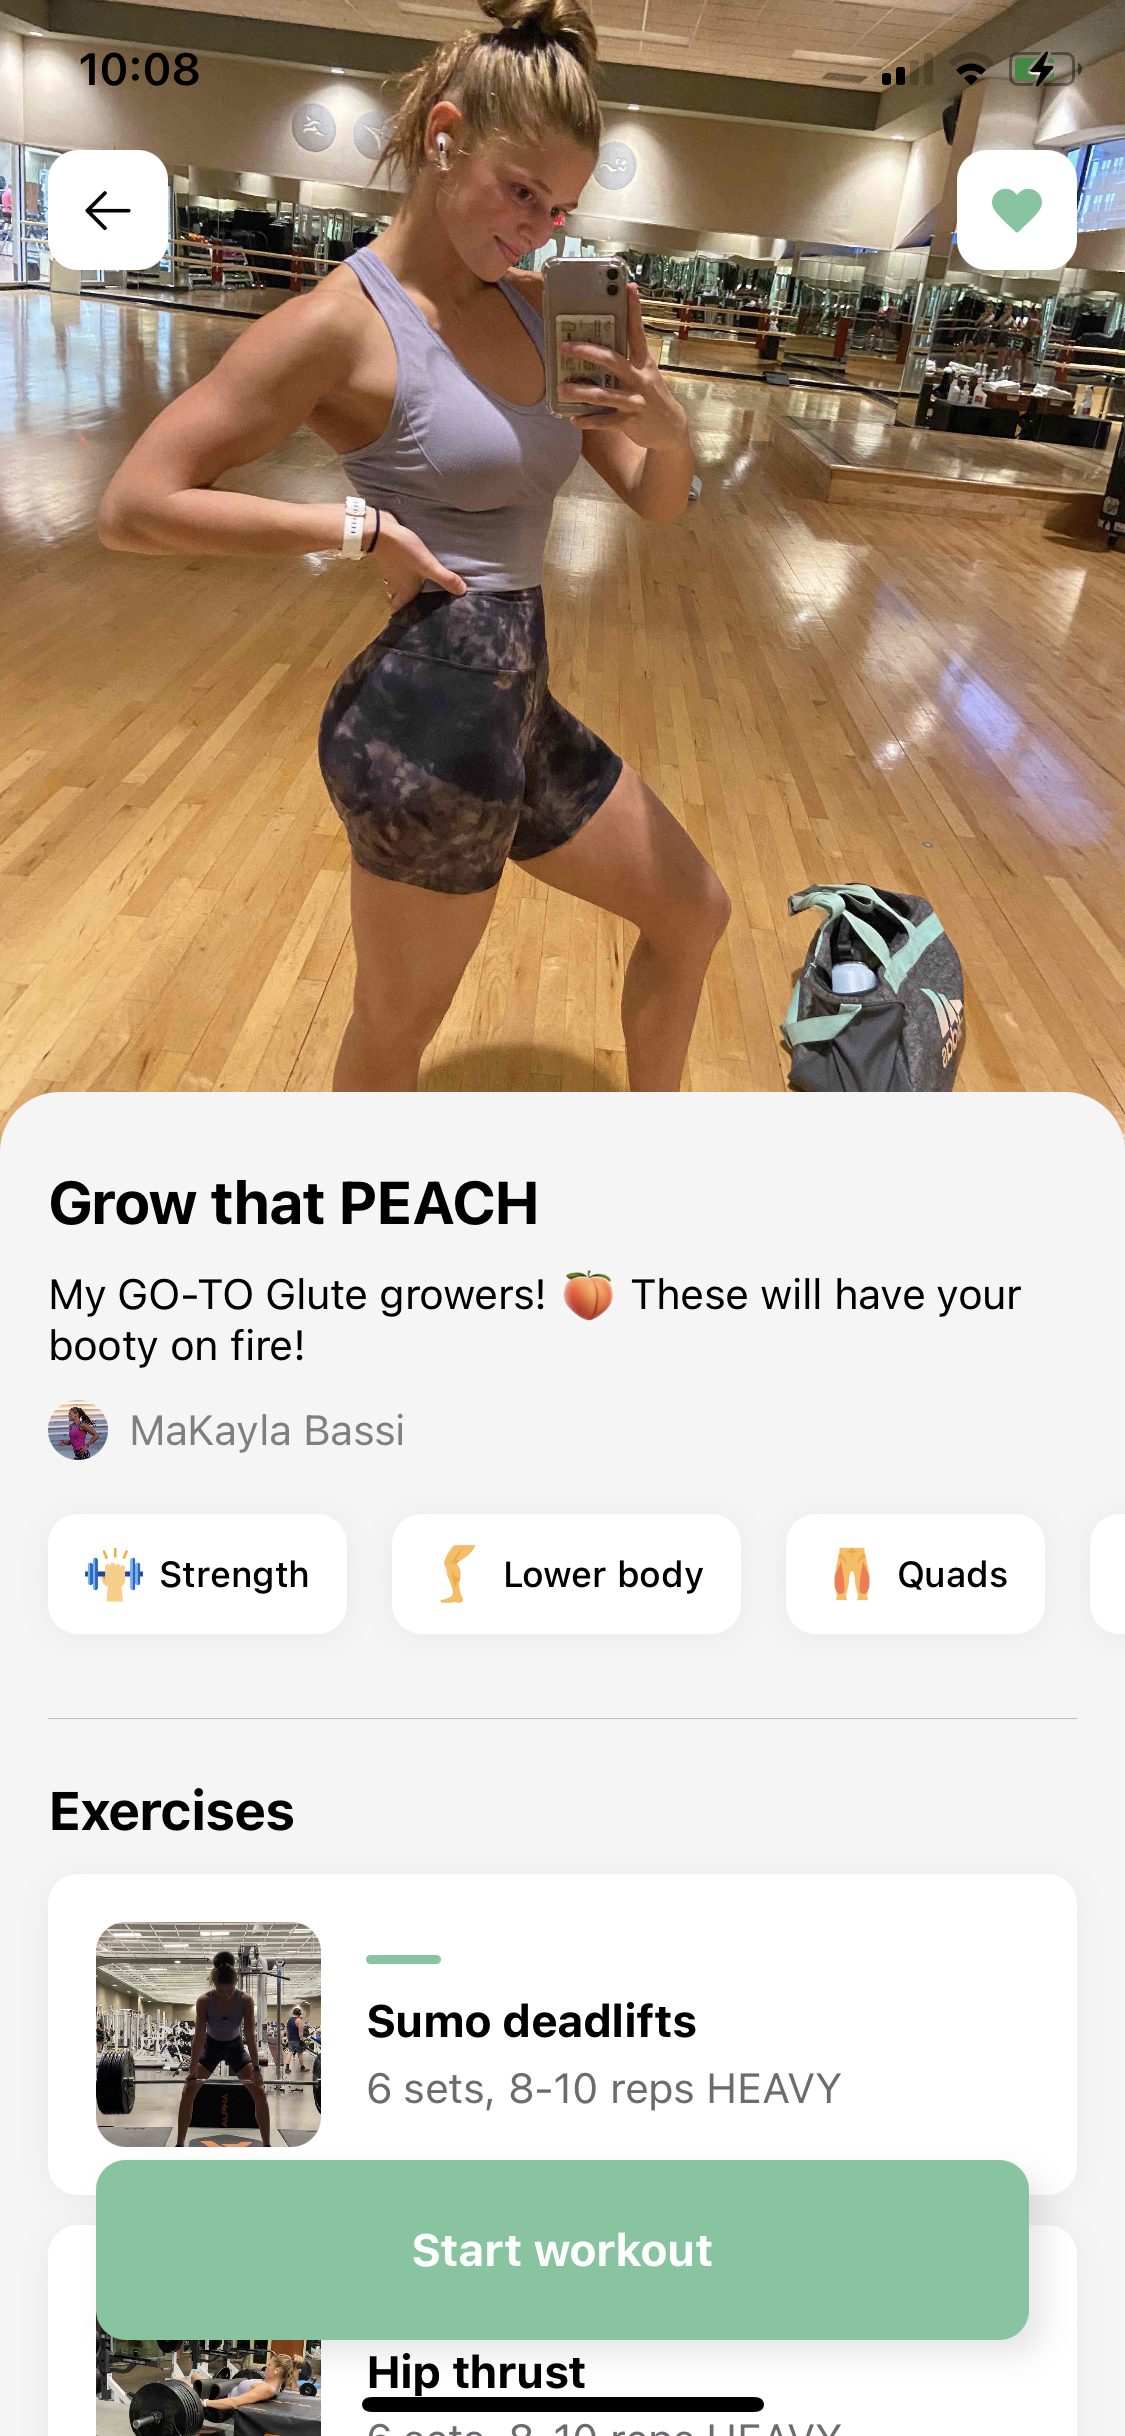 Growthatpeachpreview